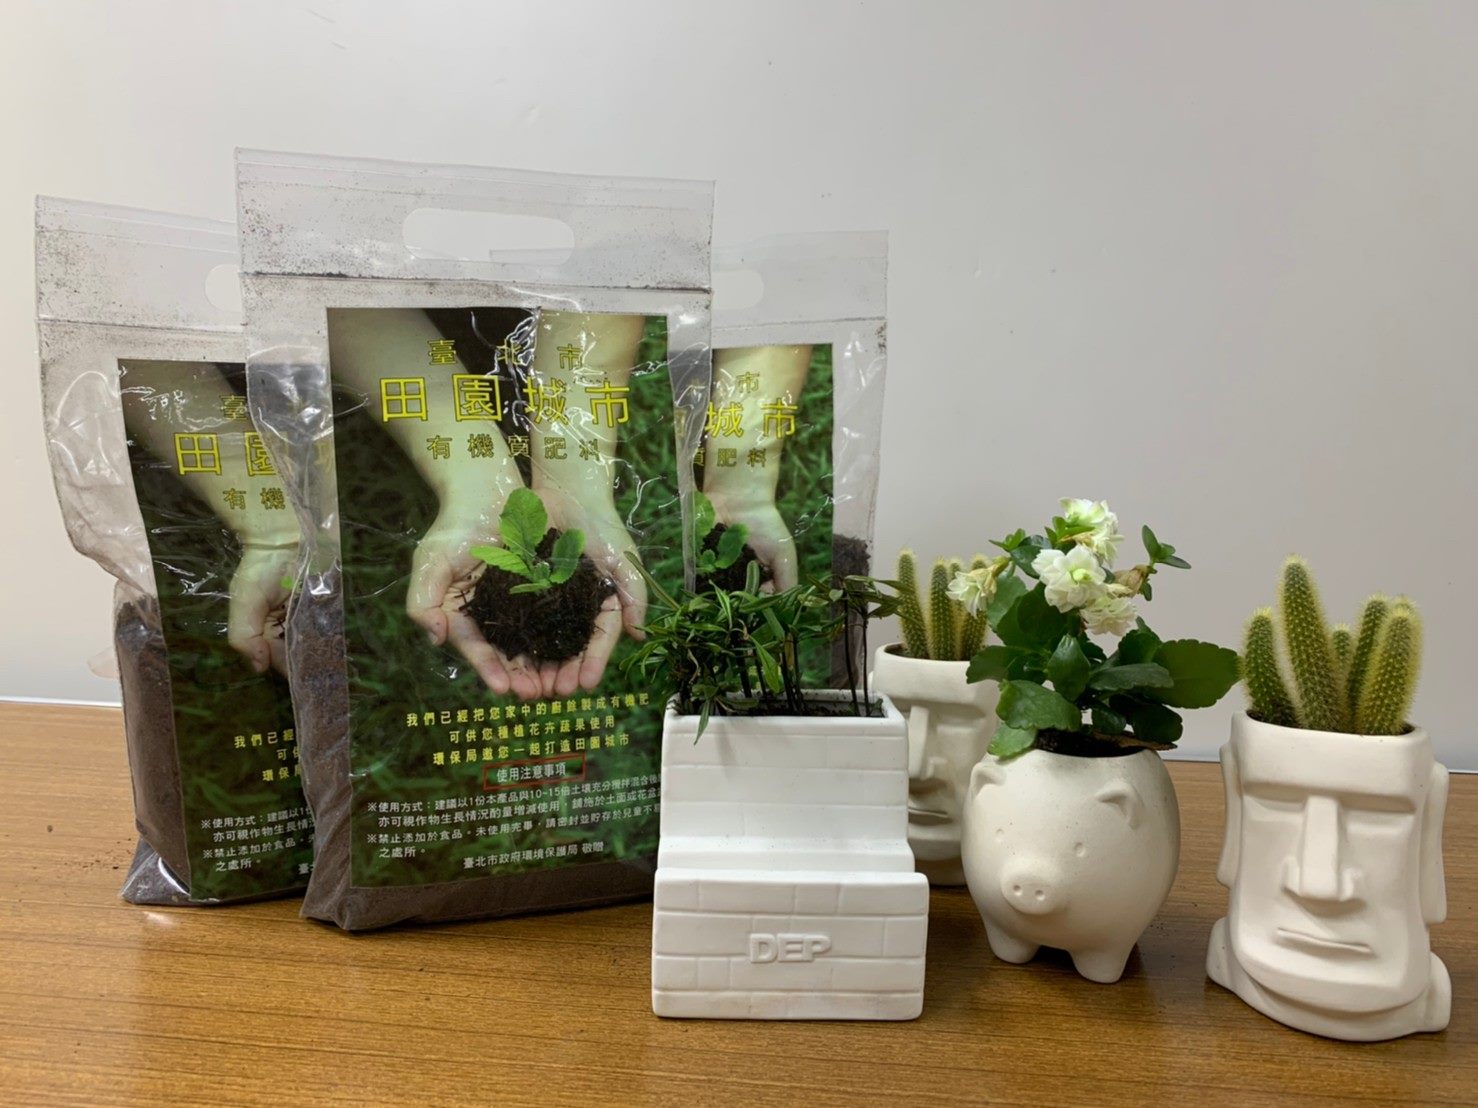 Starting 11 AM on November 8, those interested in taking home some of these fertilizers can apply online. (Photo / Provided by the Department of Environmental Protection, Taipei City Government)